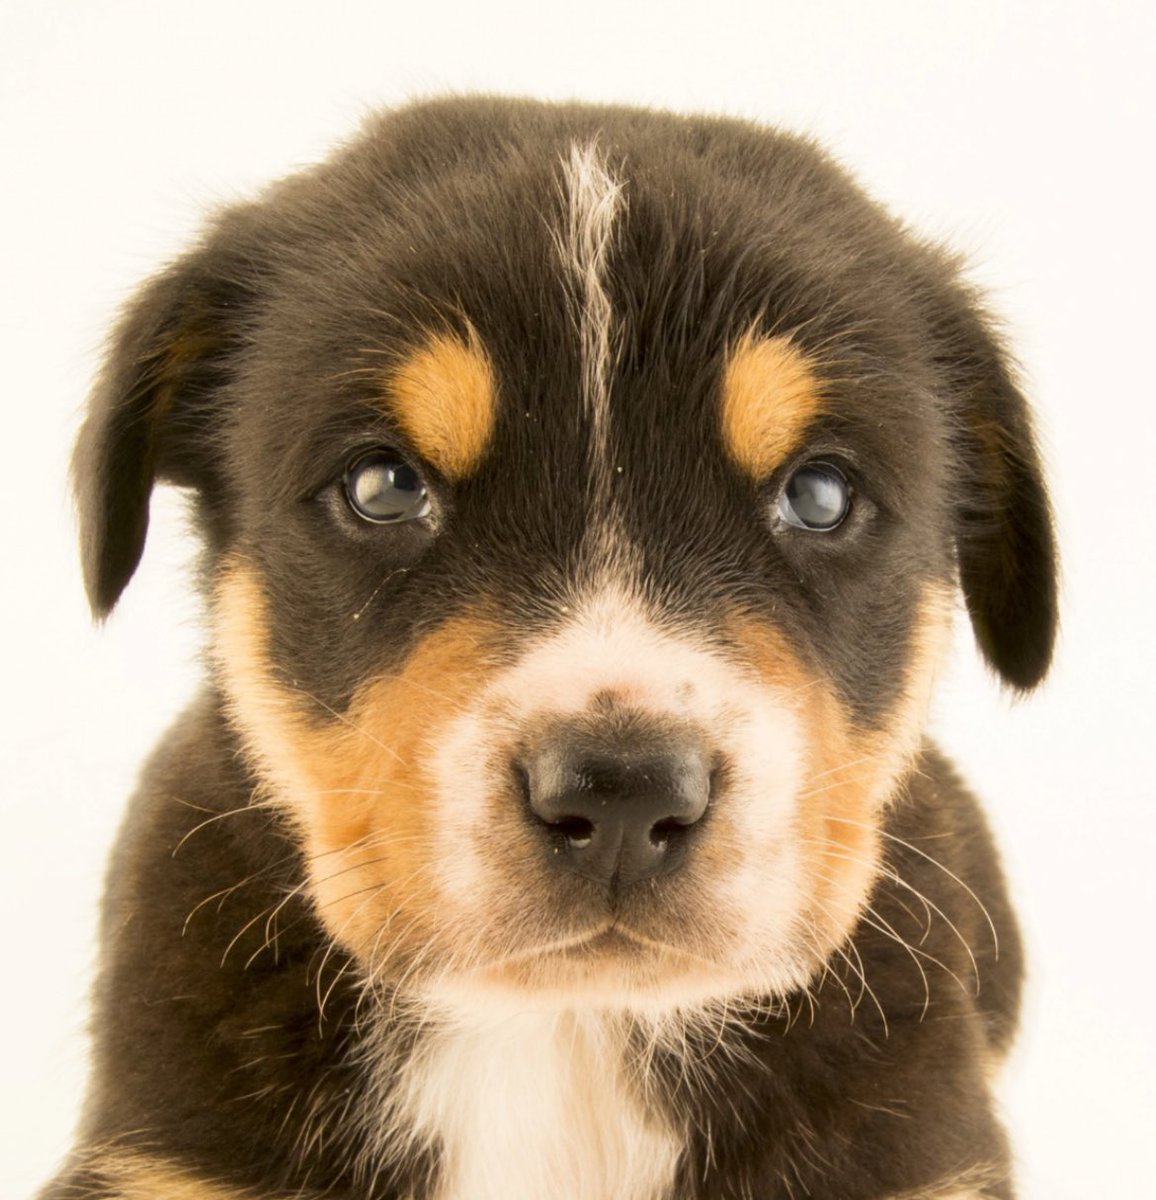 Would you slap this cute and adorable puppy for 1 million dollars?